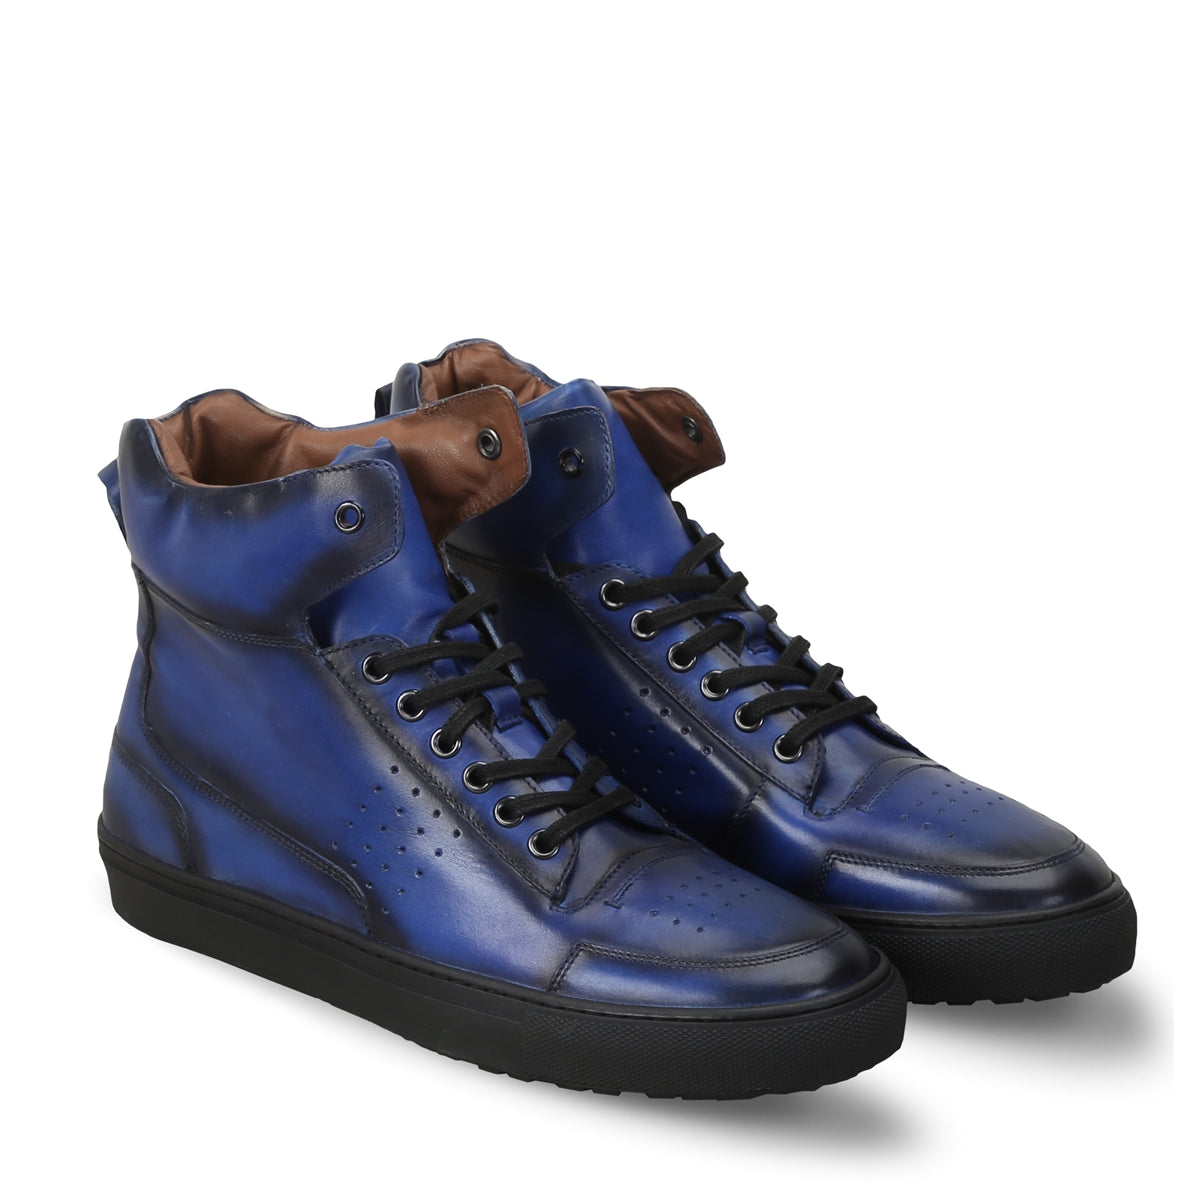 Blue Leather High-Top Black Lace And Sole Sneakers By Brune & Bareskin